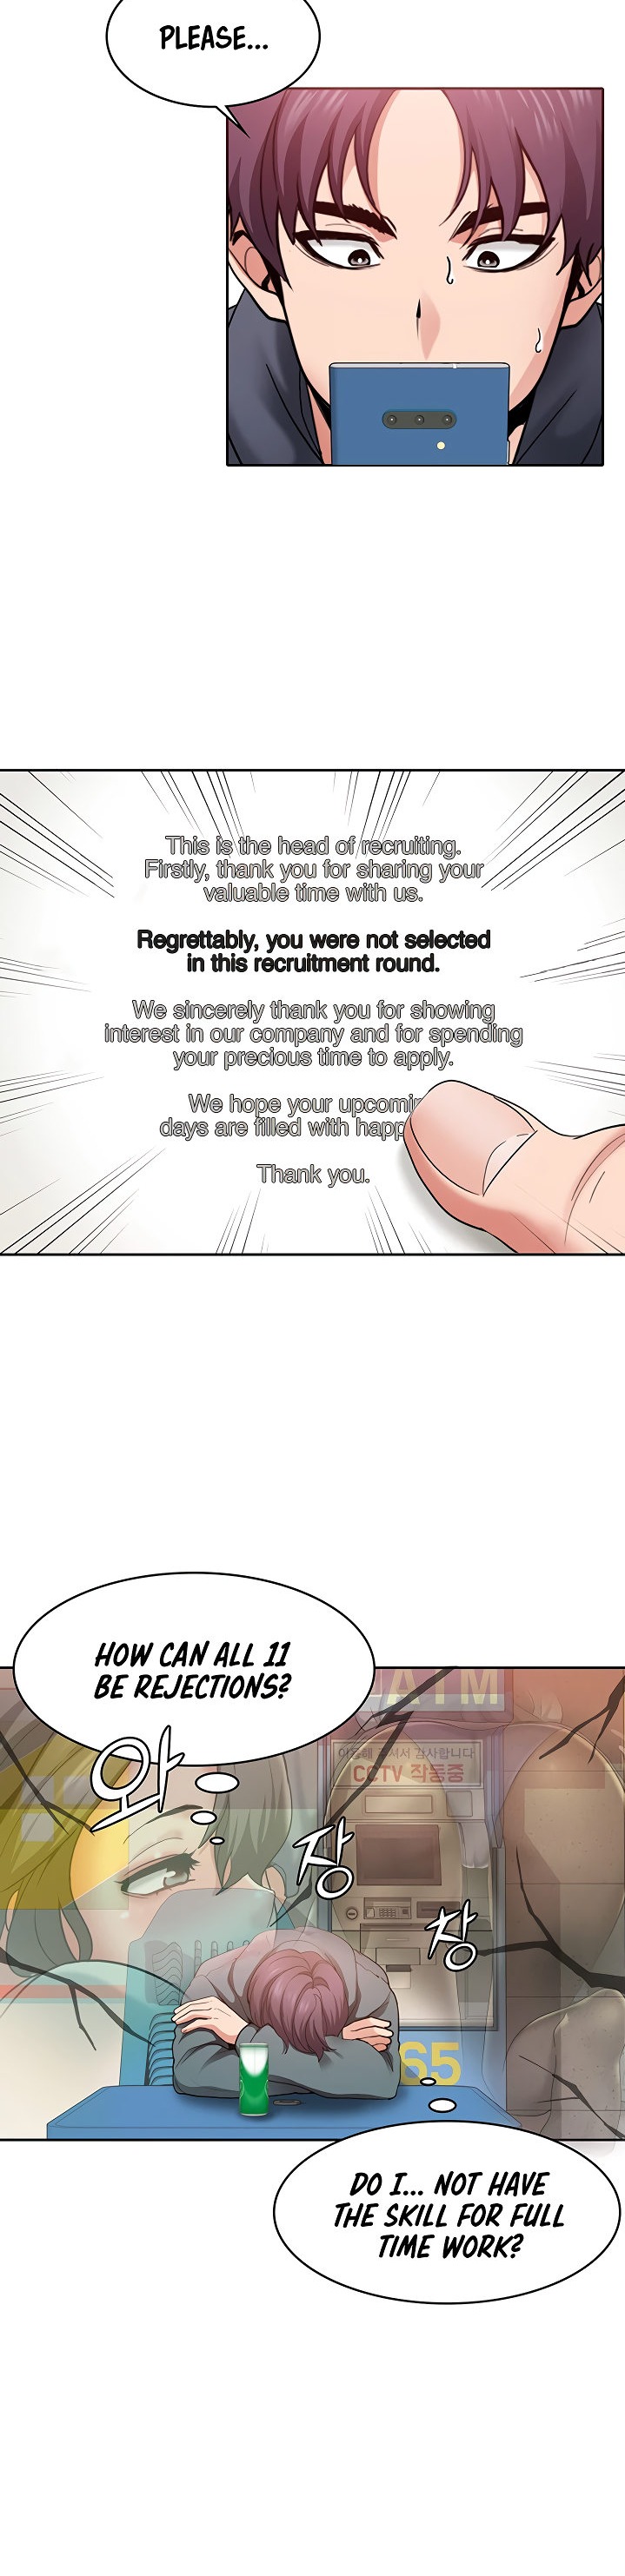 Need A Service? - Chapter 1 Page 7